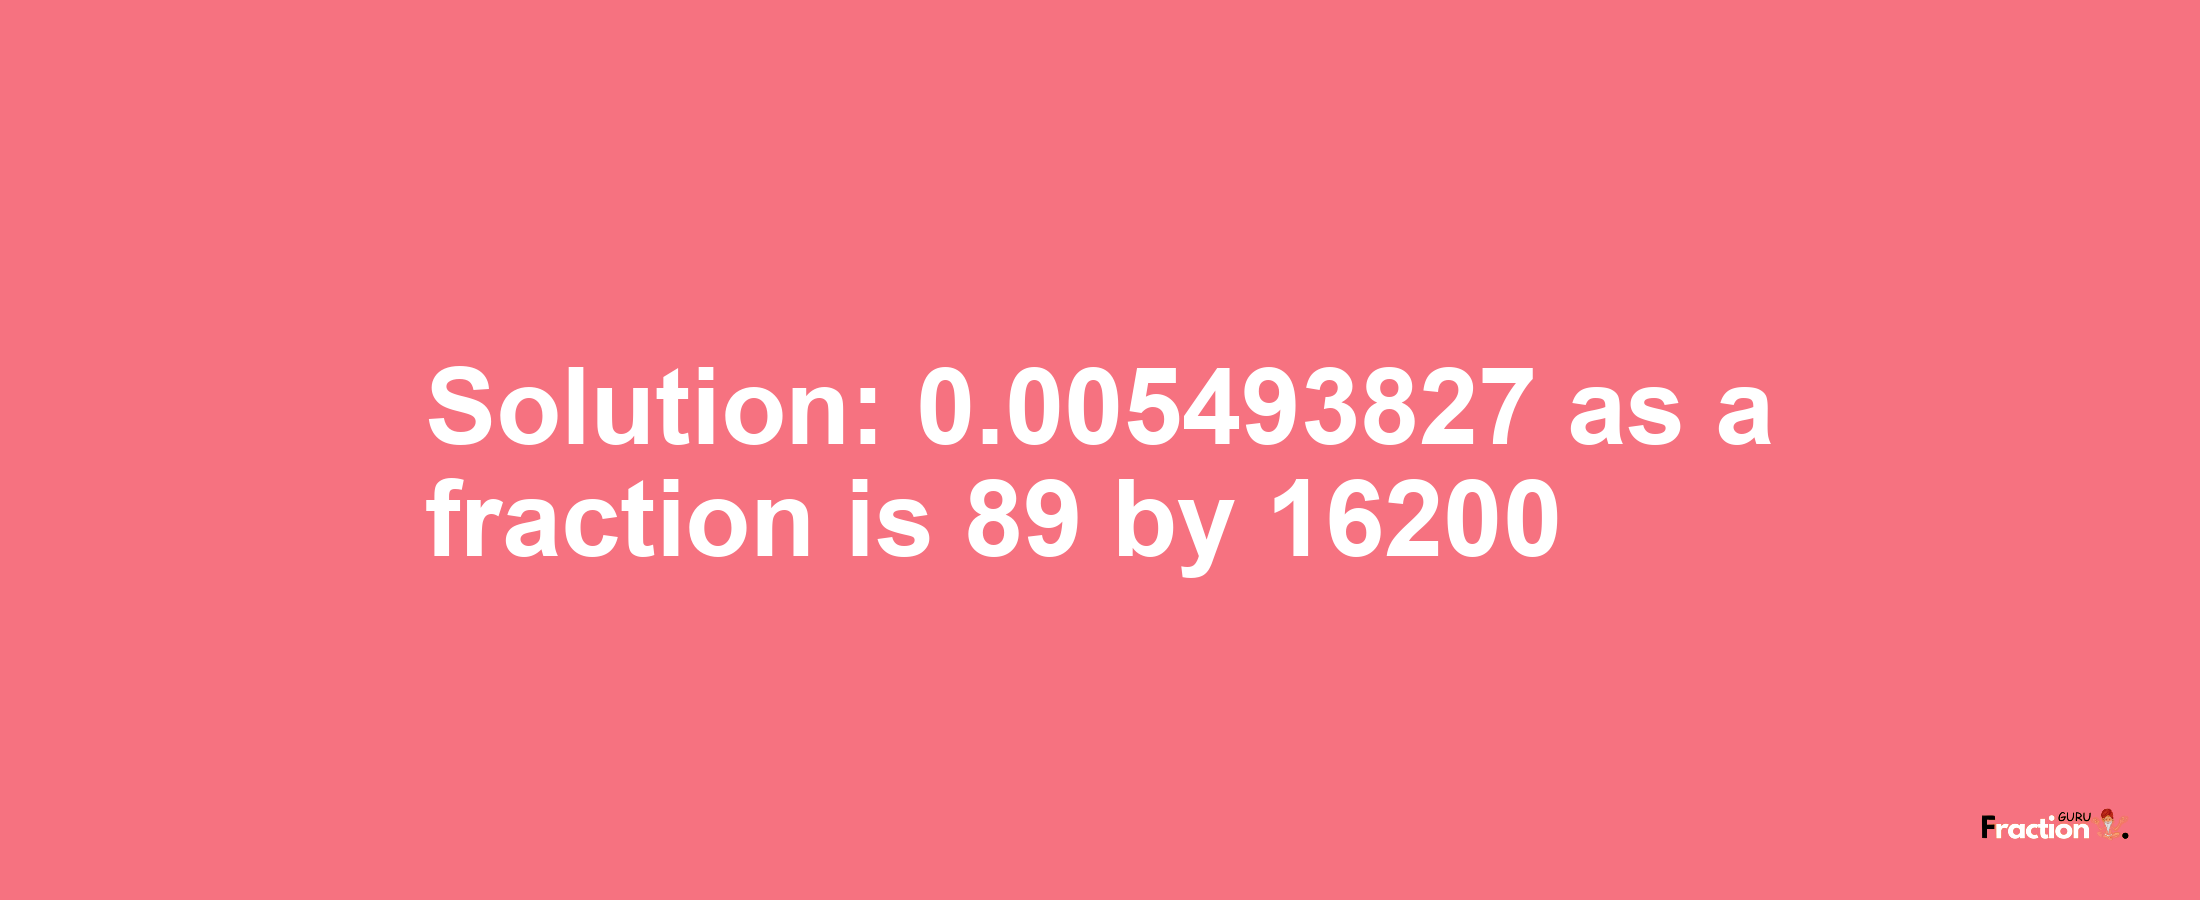 Solution:0.005493827 as a fraction is 89/16200